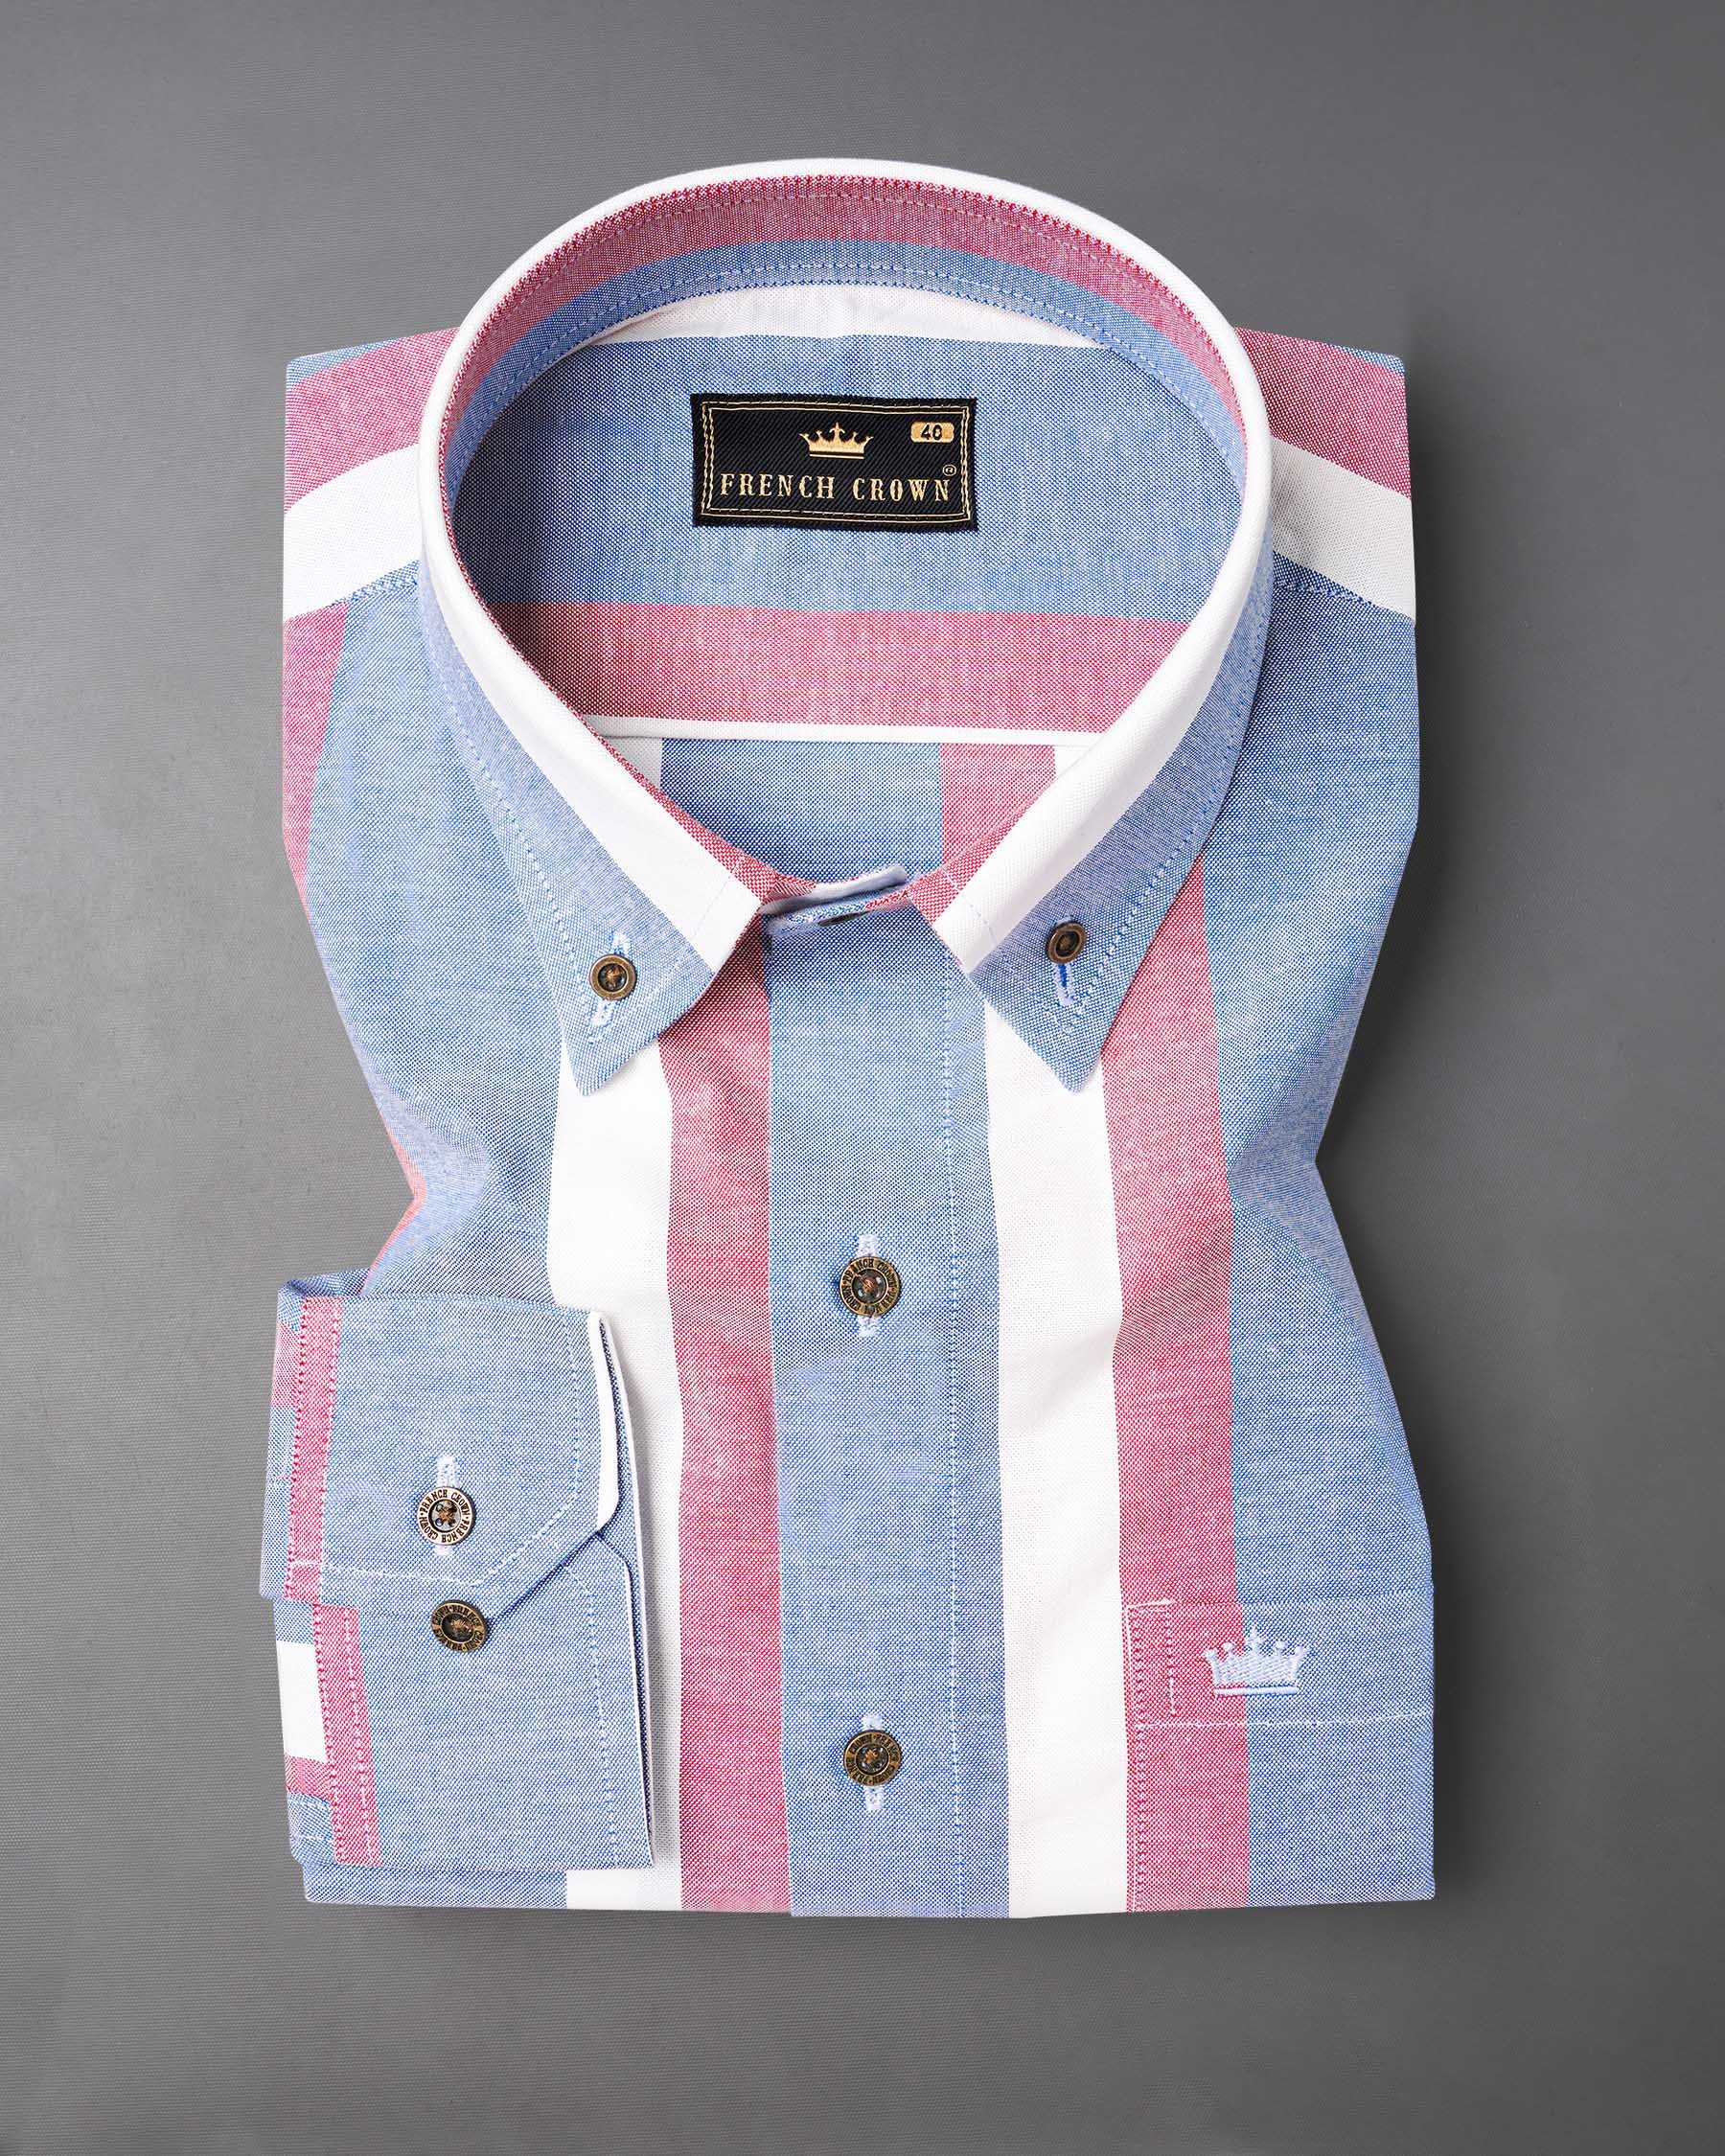 Wistful Blue and Charm Pink Striped Royal Oxford Shirt